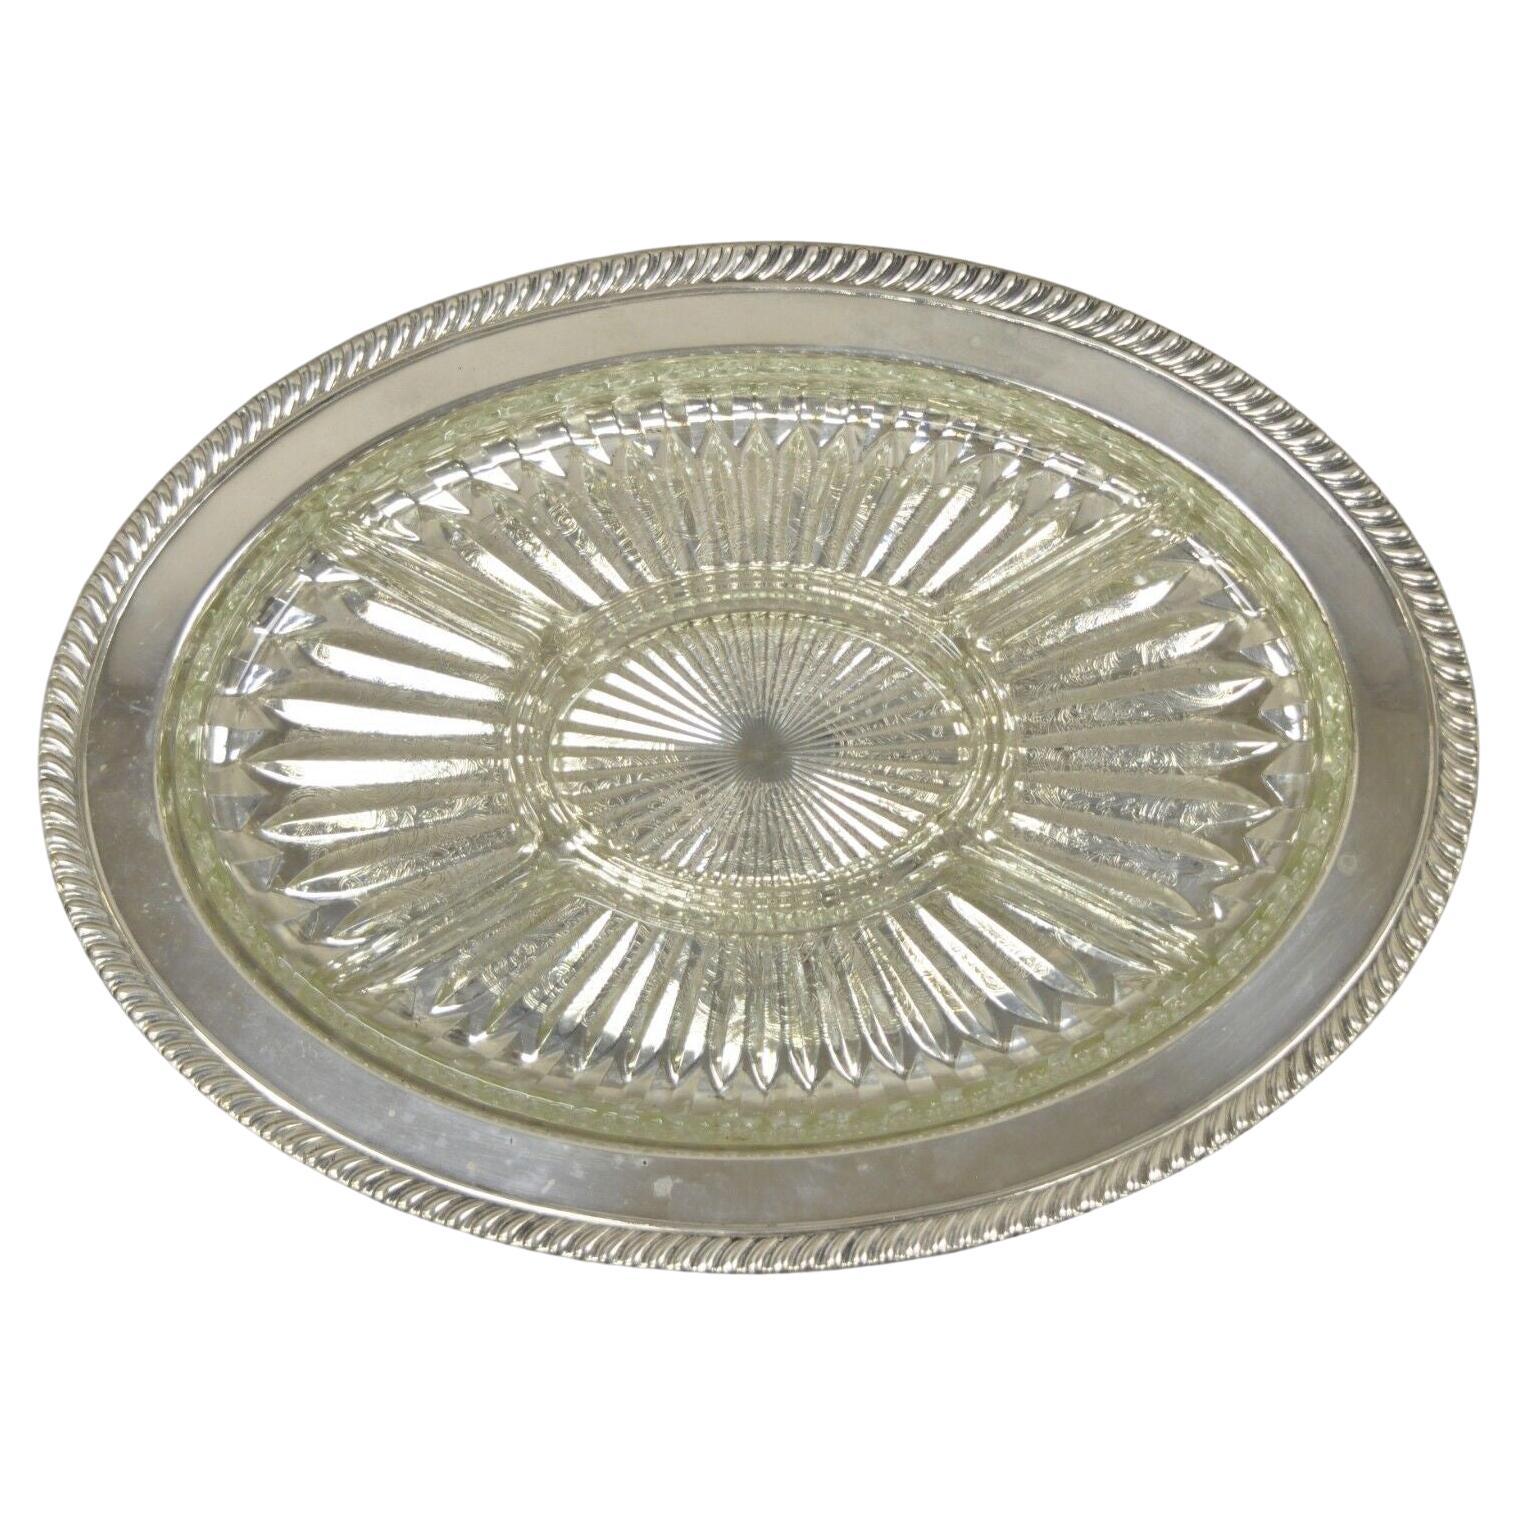 Vintage English Regency Style Silver Plated Oval Serving Dish Platter